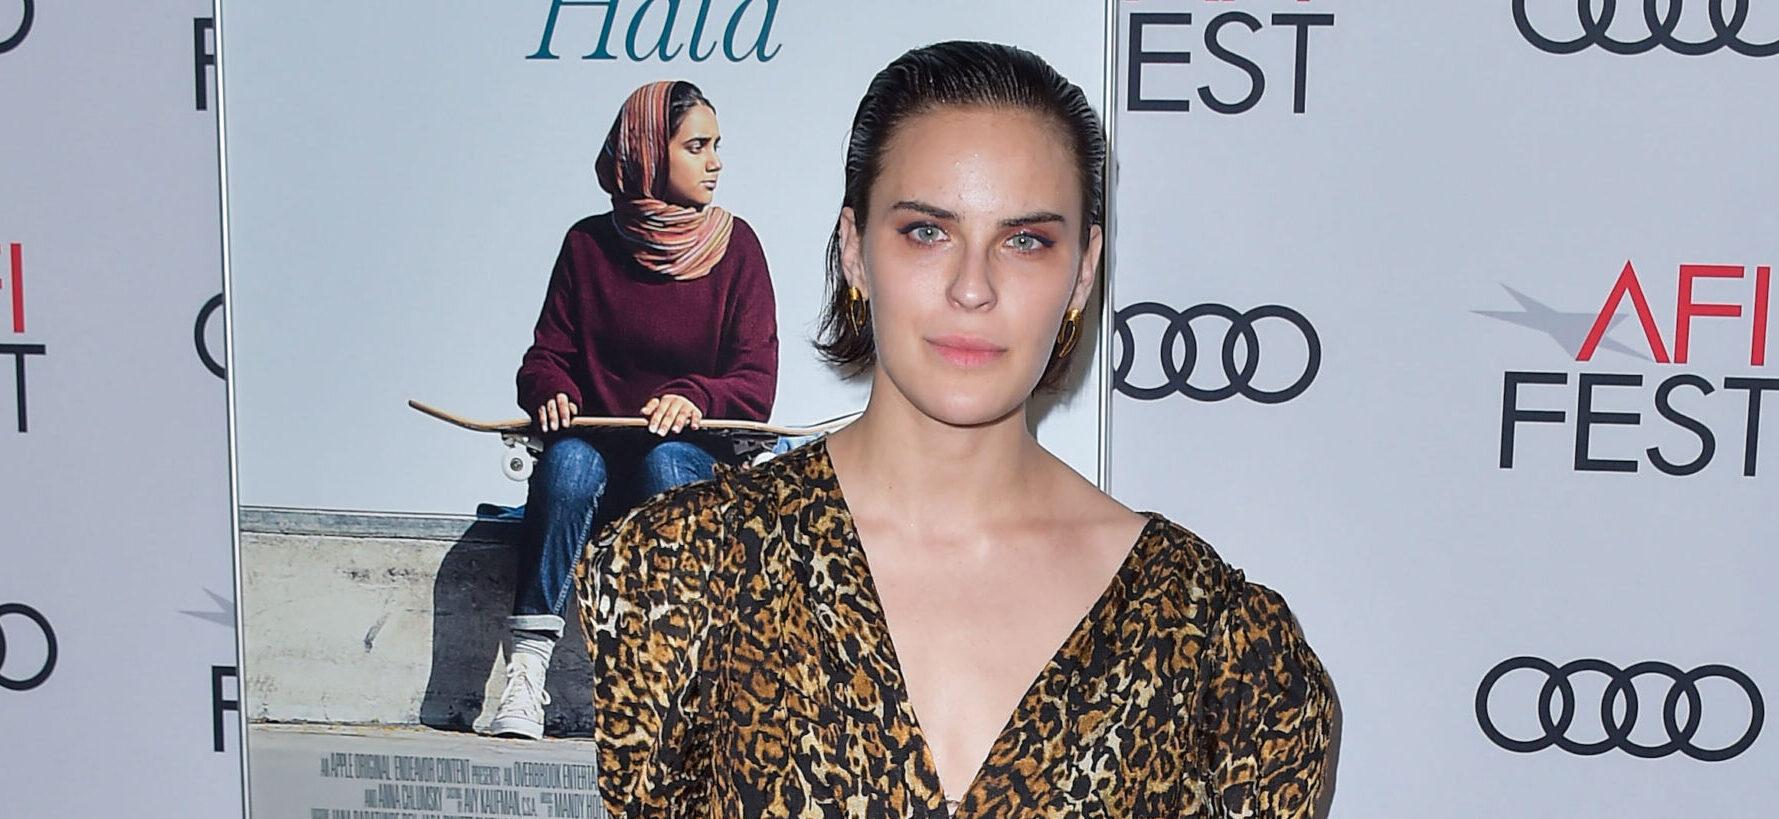 Tallulah Willis Speaks Candidly About Recovering From Eating Disorder: ‘I’m Not Alone’